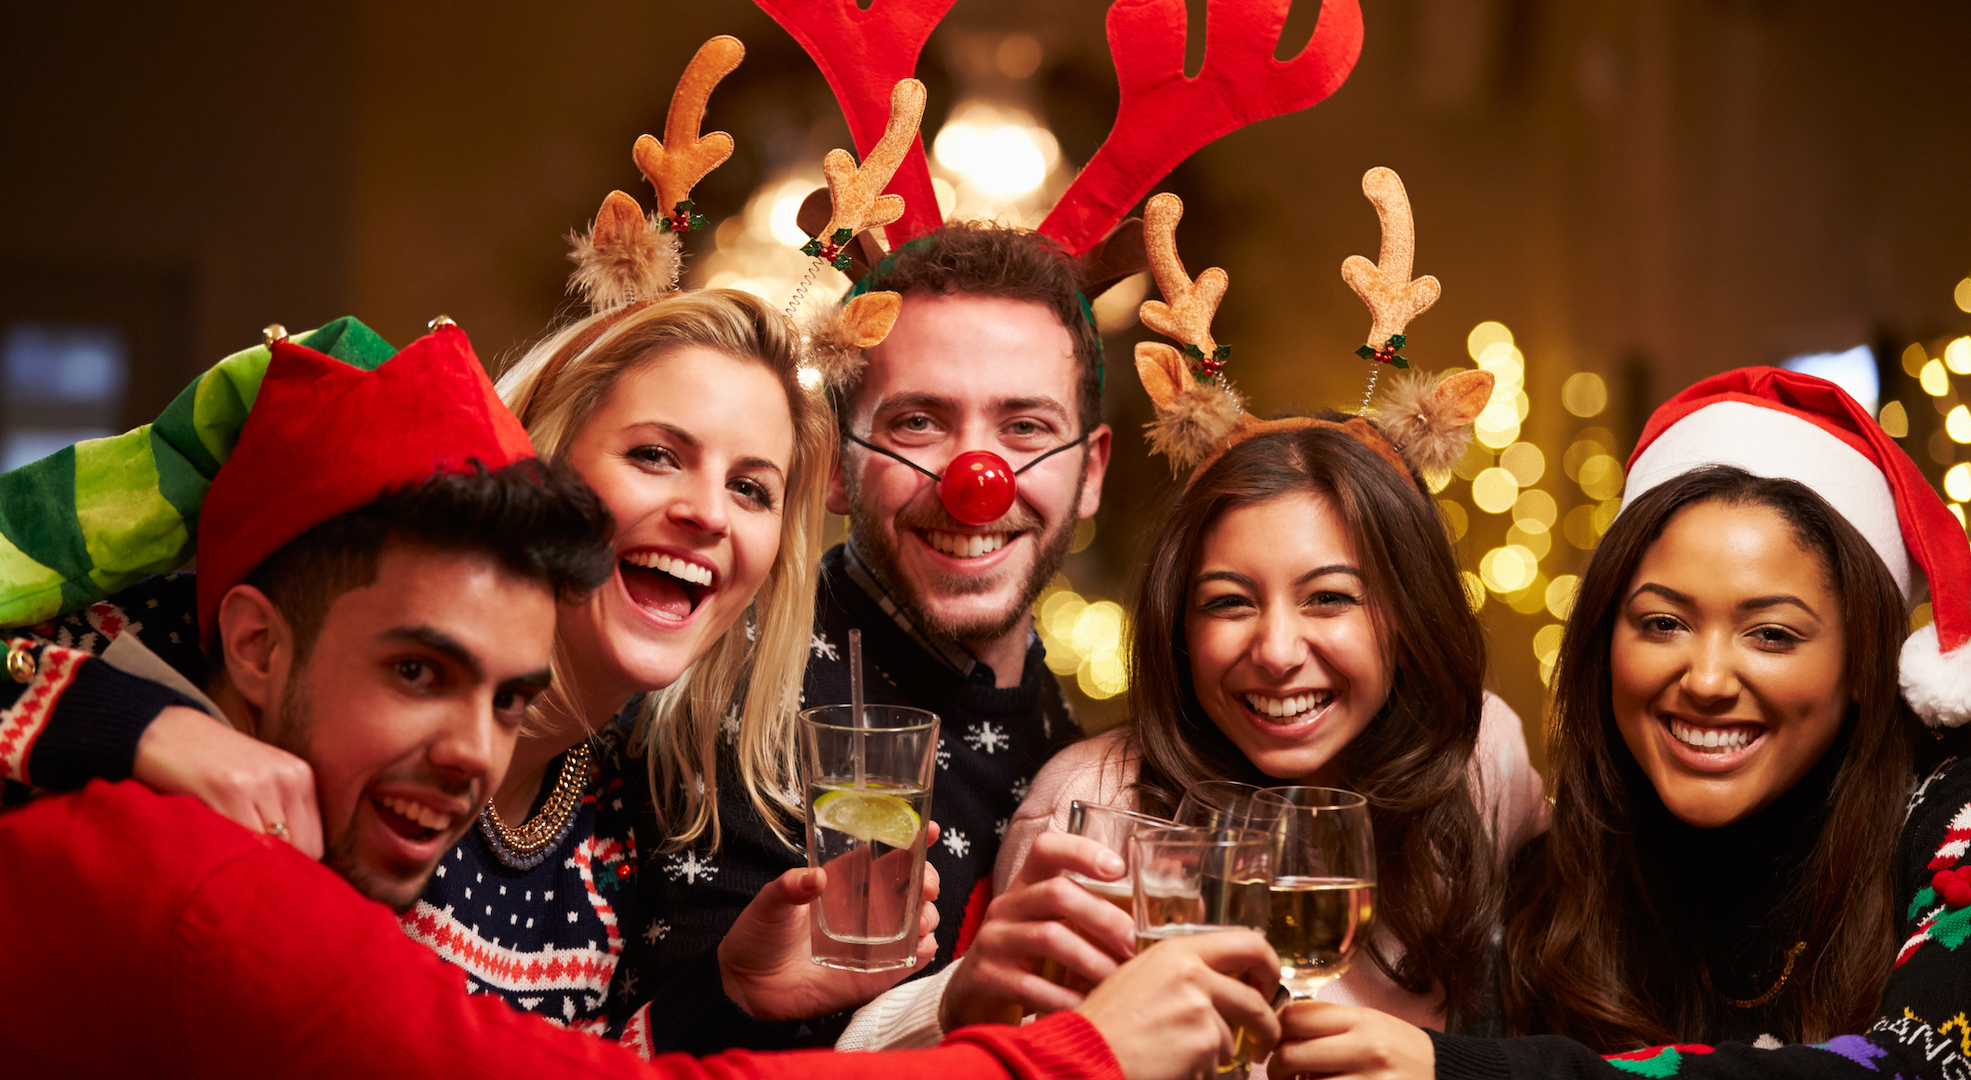 Top tips for Christmas party photography